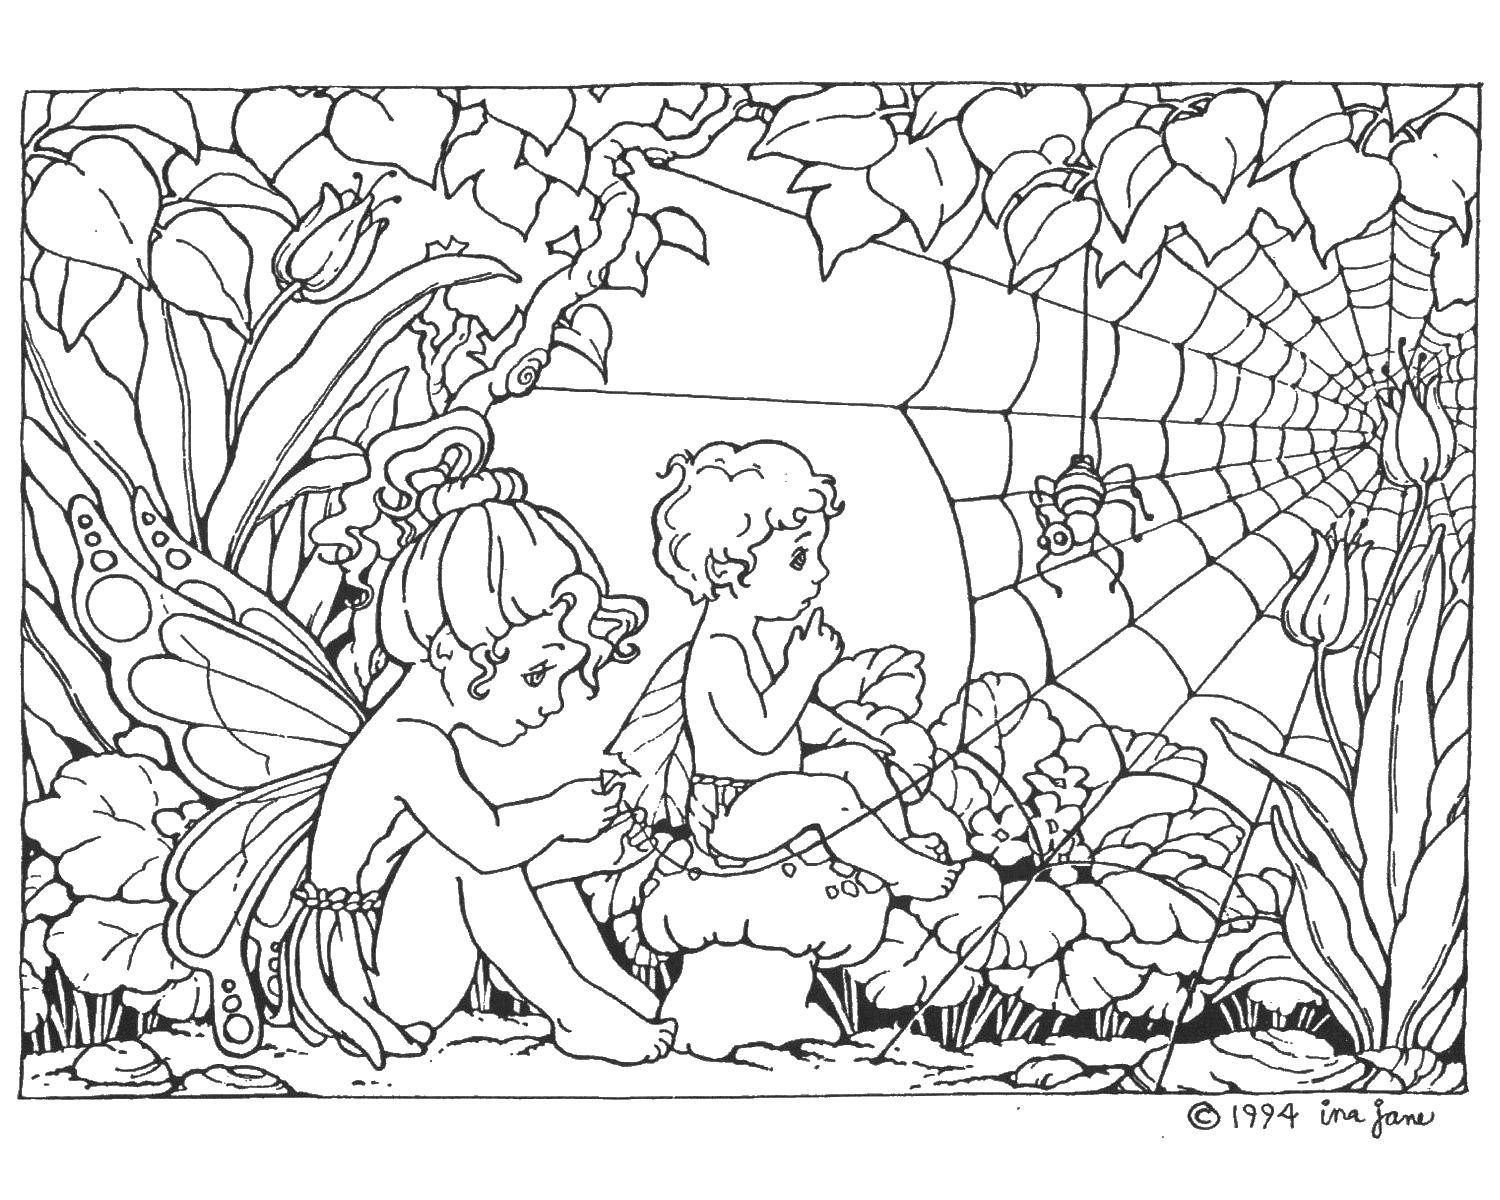 Coloring The fairy and the boy. Category Fantasy. Tags:  fairy, boy, web, spider.